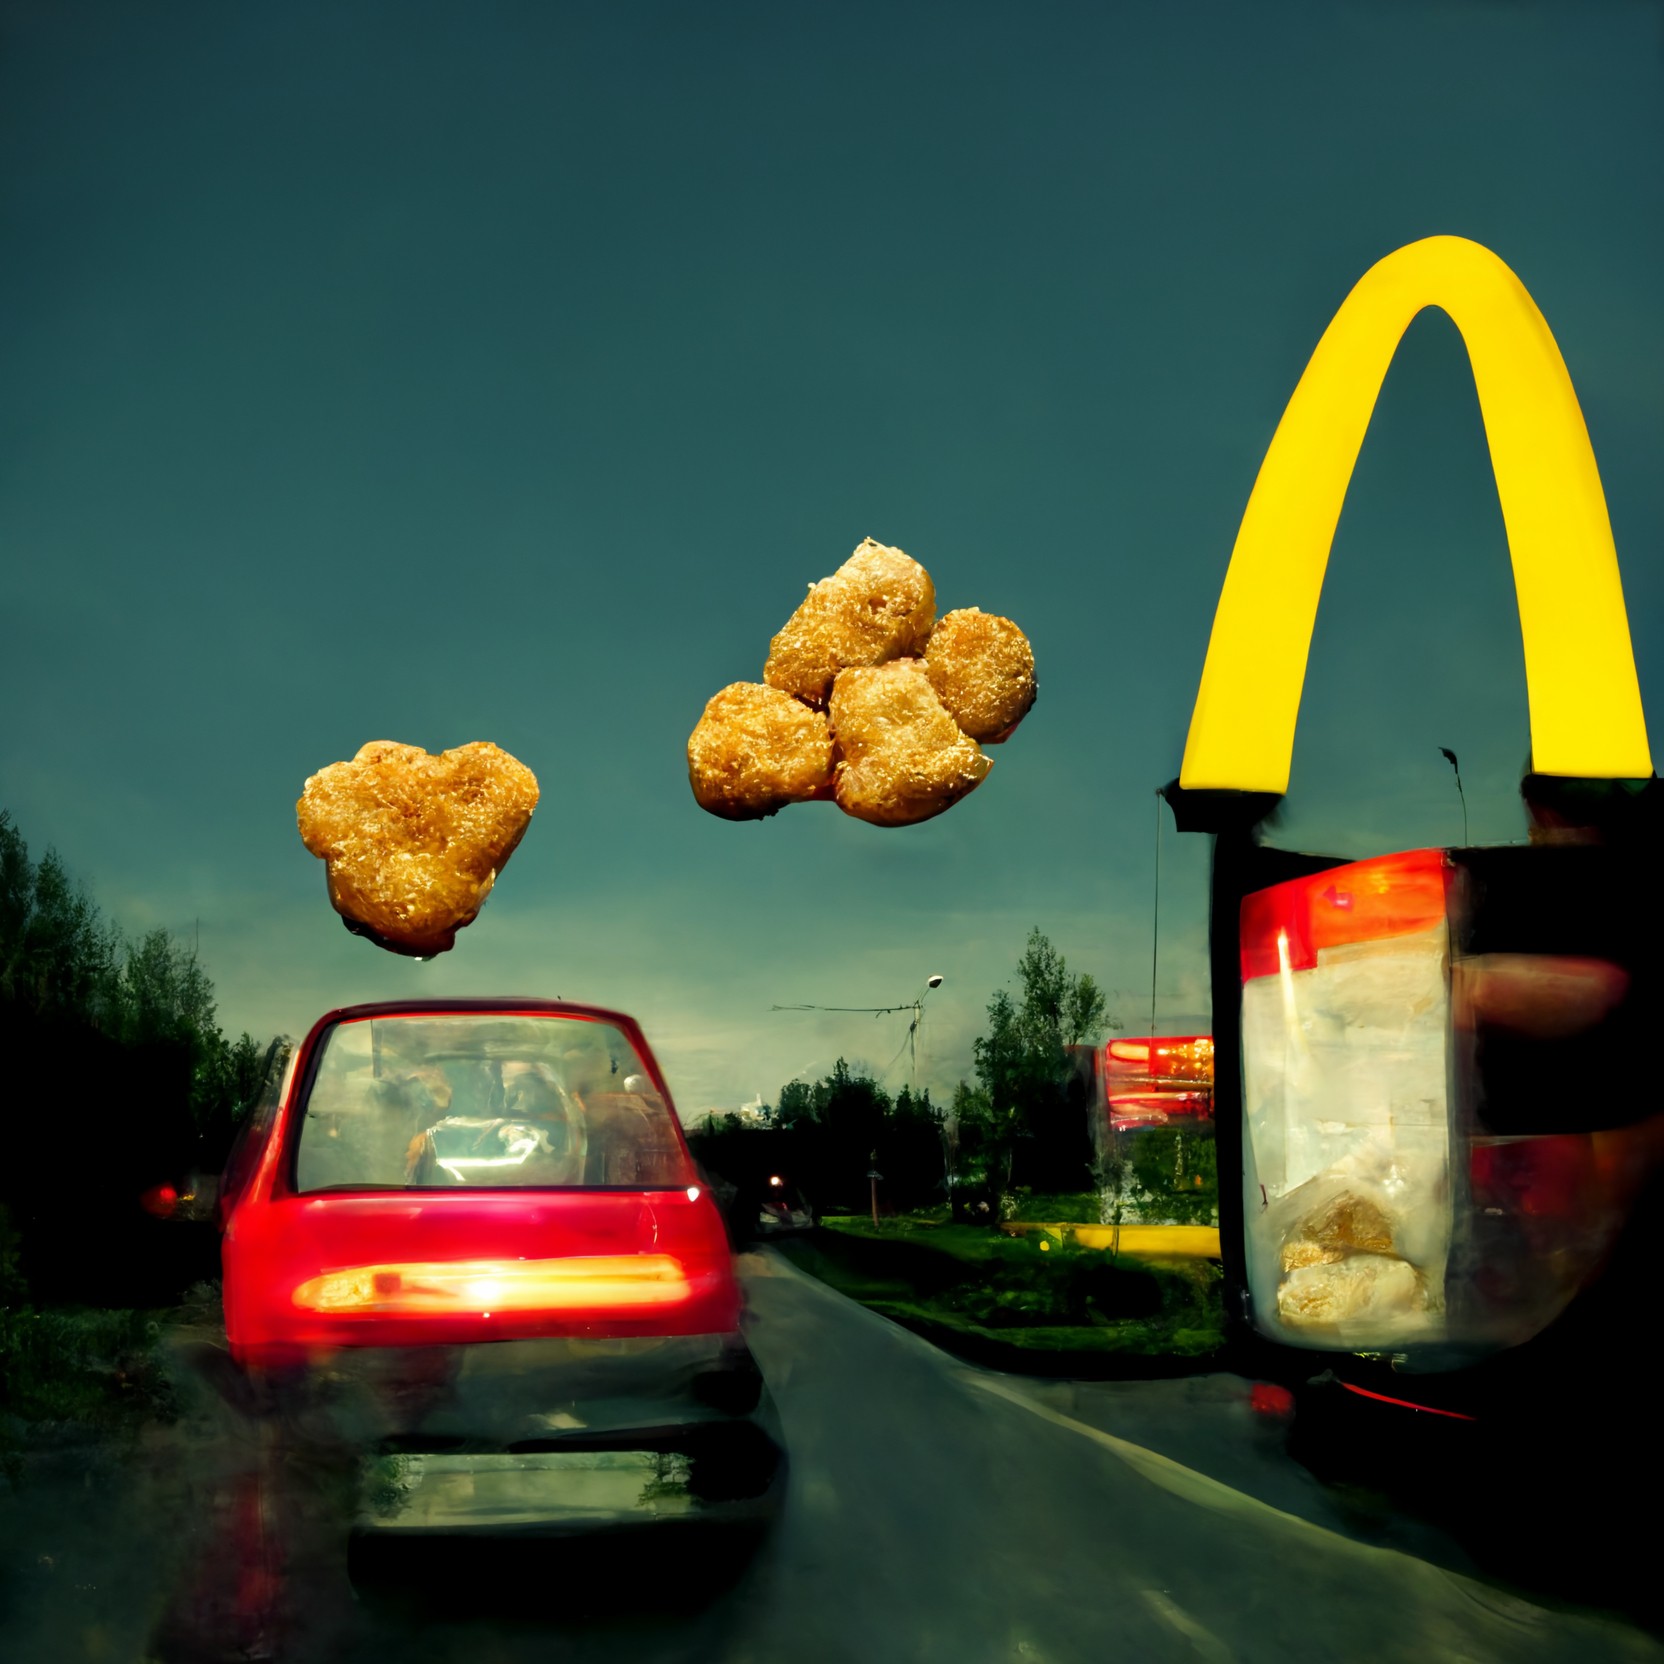 driving home from mcdonalds, holding nuggets in hand, life is good